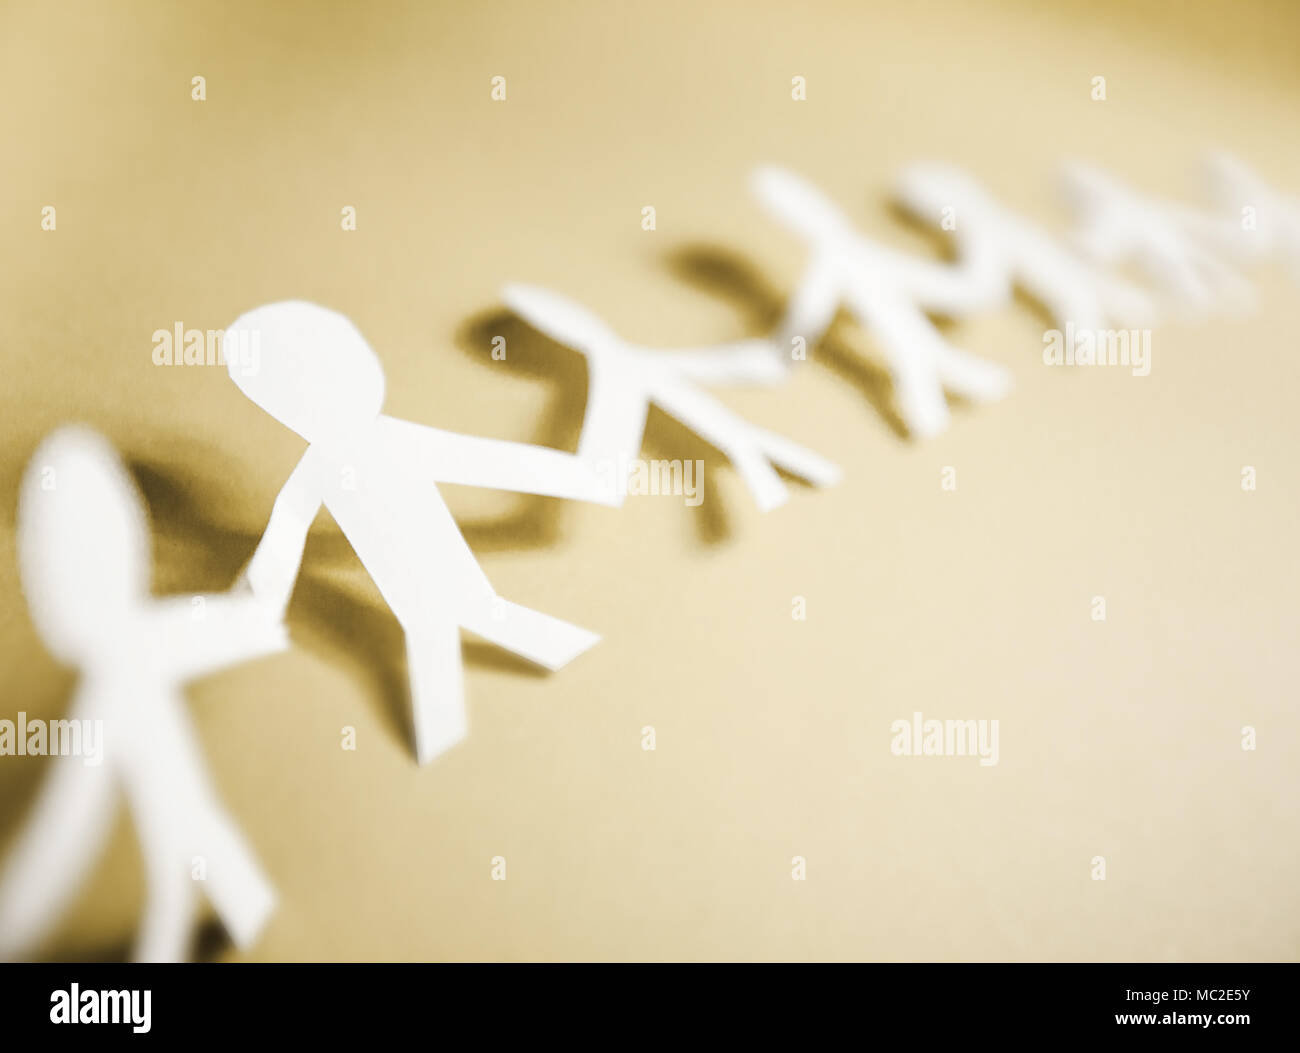 Connected support together, team paper doll people chain Stock Photo